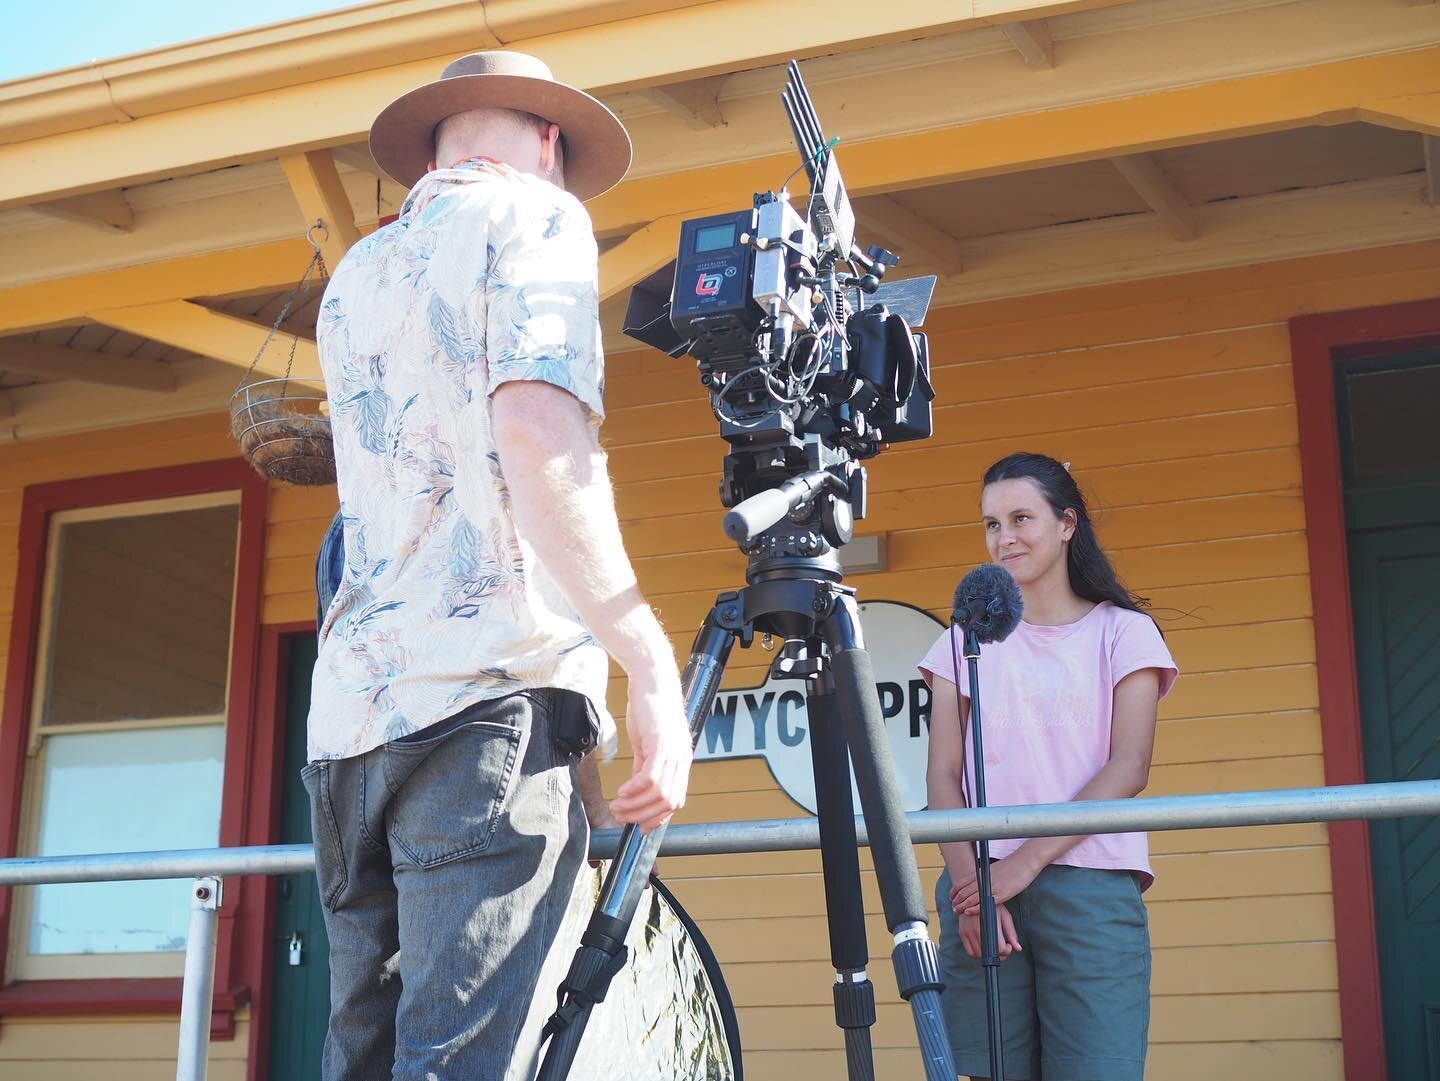 📻 FYI is dominating the airwaves! 📻

Tune into ABC Wimmera radio tomorrow Thurs 26th May at 8:50am to hear Wycheproof's Amara Cowell and Isabelle Mulquiny talk about telling their stories, and being part of the FYI Film Festival.

Listen online: ab